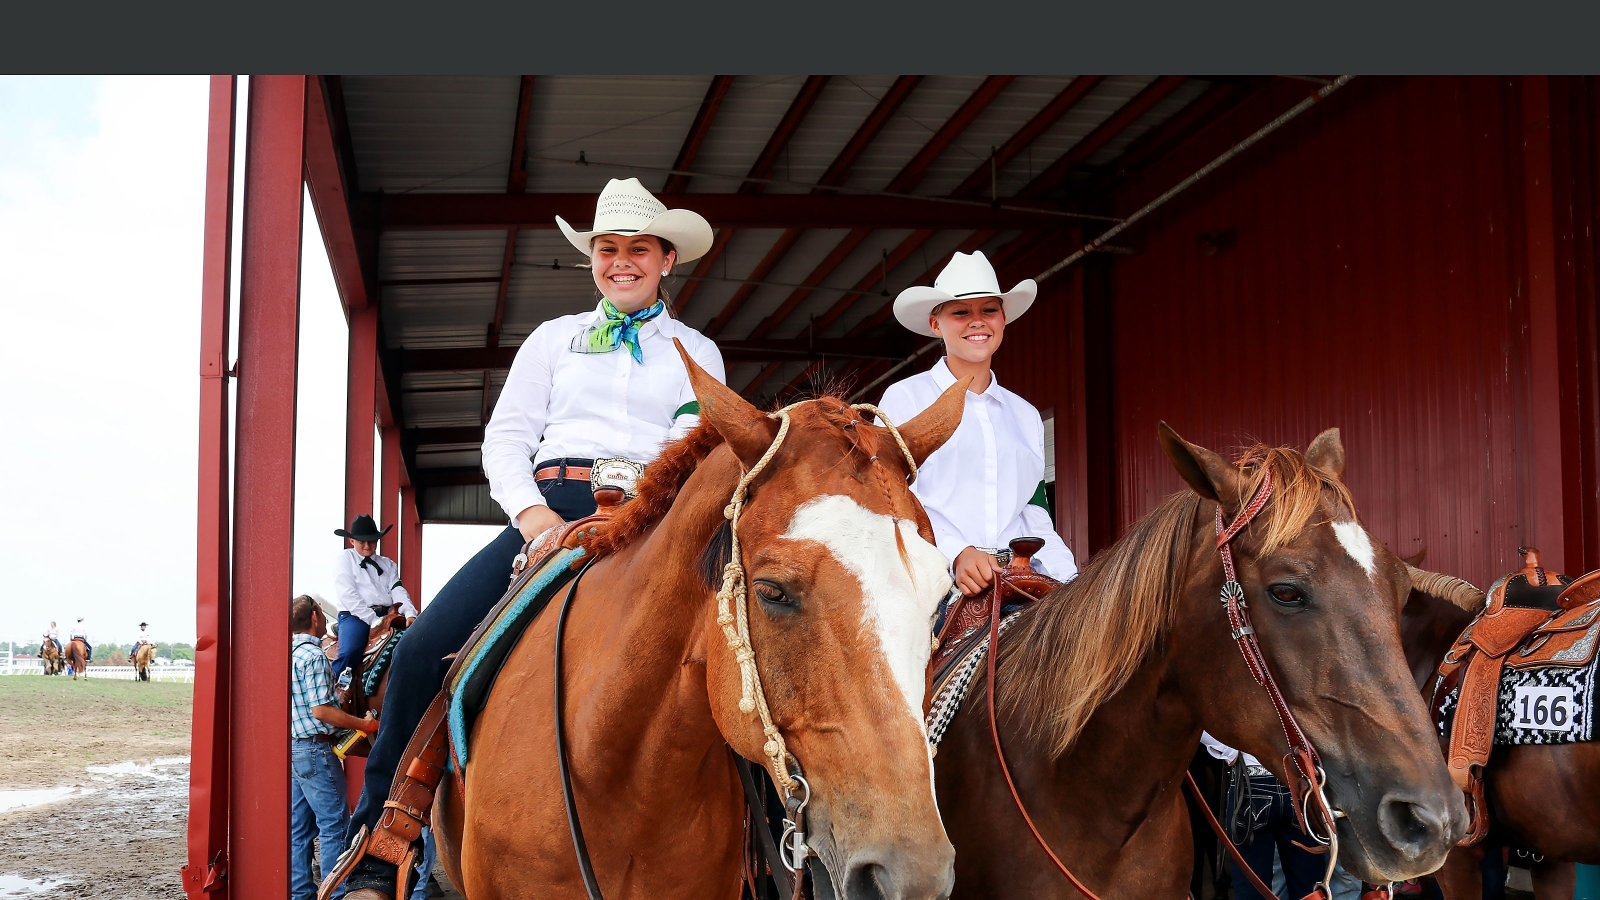 two 4-h riders on a horse pose for picture